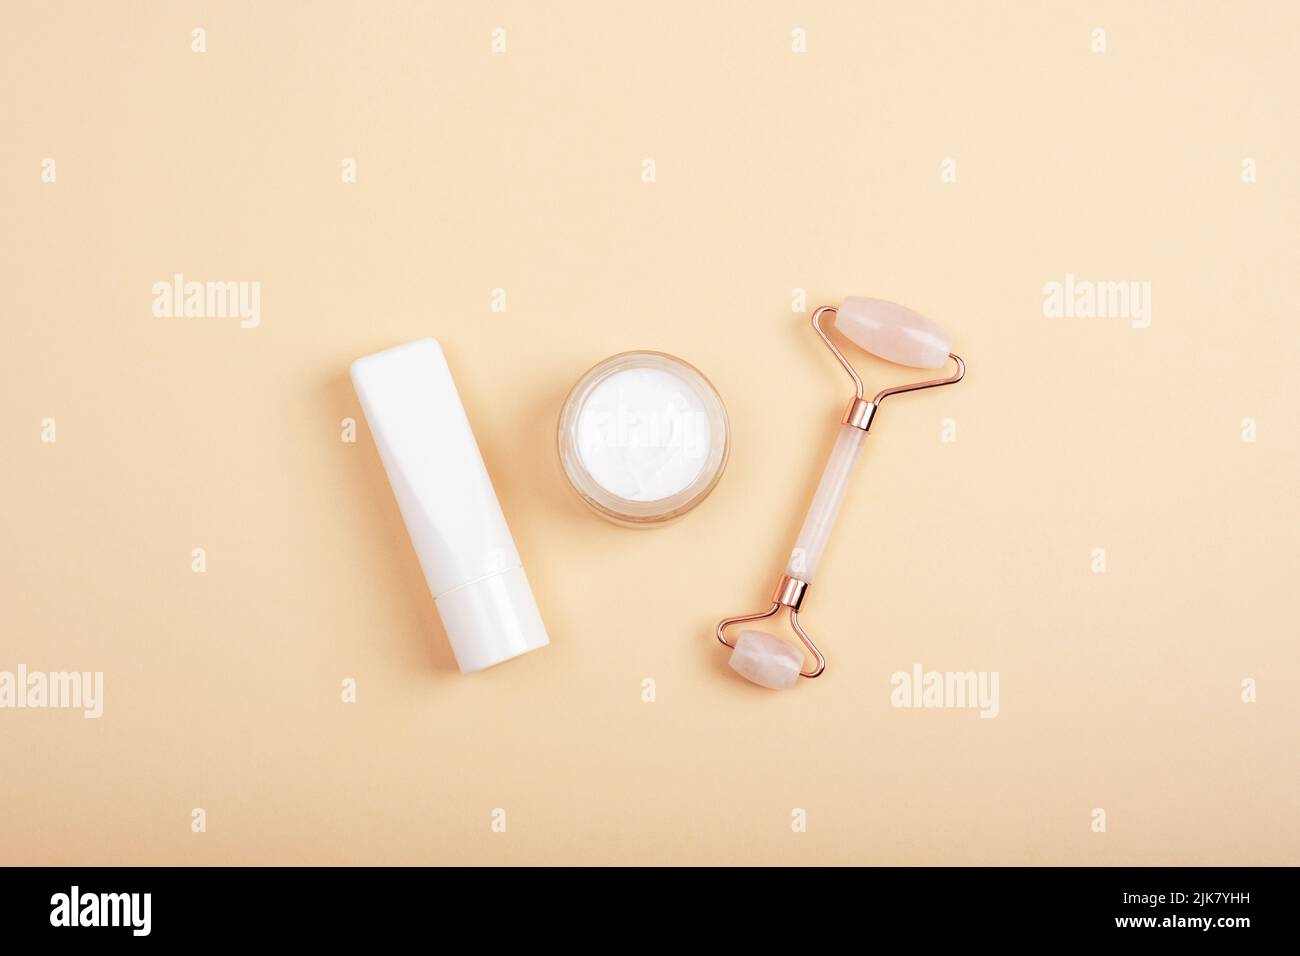 Rose quartz crystal facial roller, cream jar and tube on neutral beige background. Natural cosmetics, skin care concept. Top view, flat lay, mockup. Stock Photo